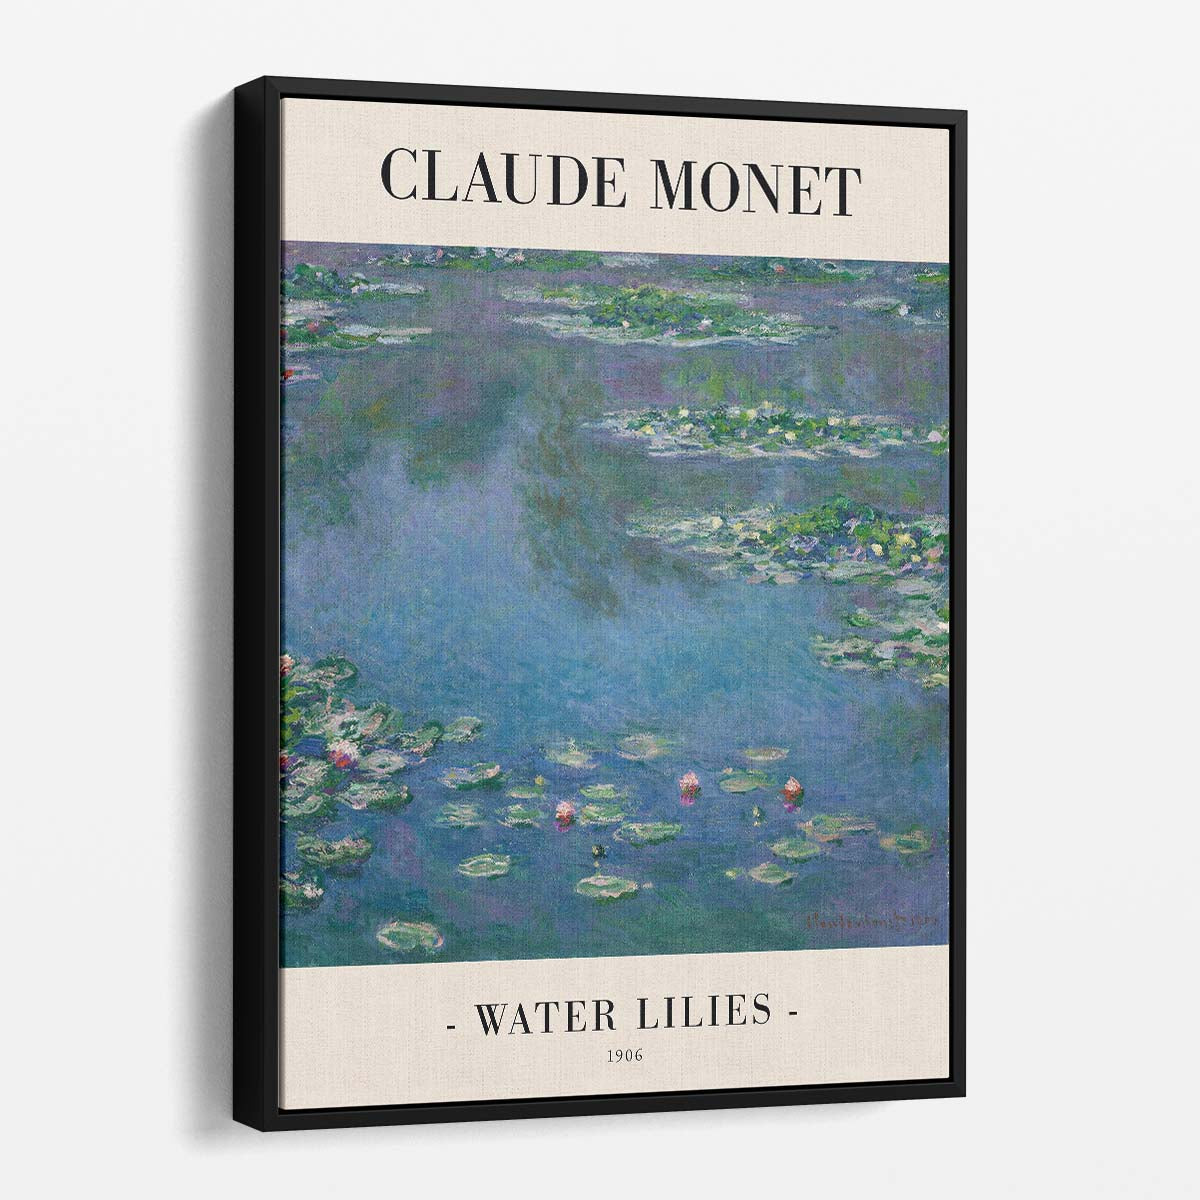 Claude Monet Water Lilies Floral Art Poster, Inspirational Botanical Illustration by Luxuriance Designs, made in USA